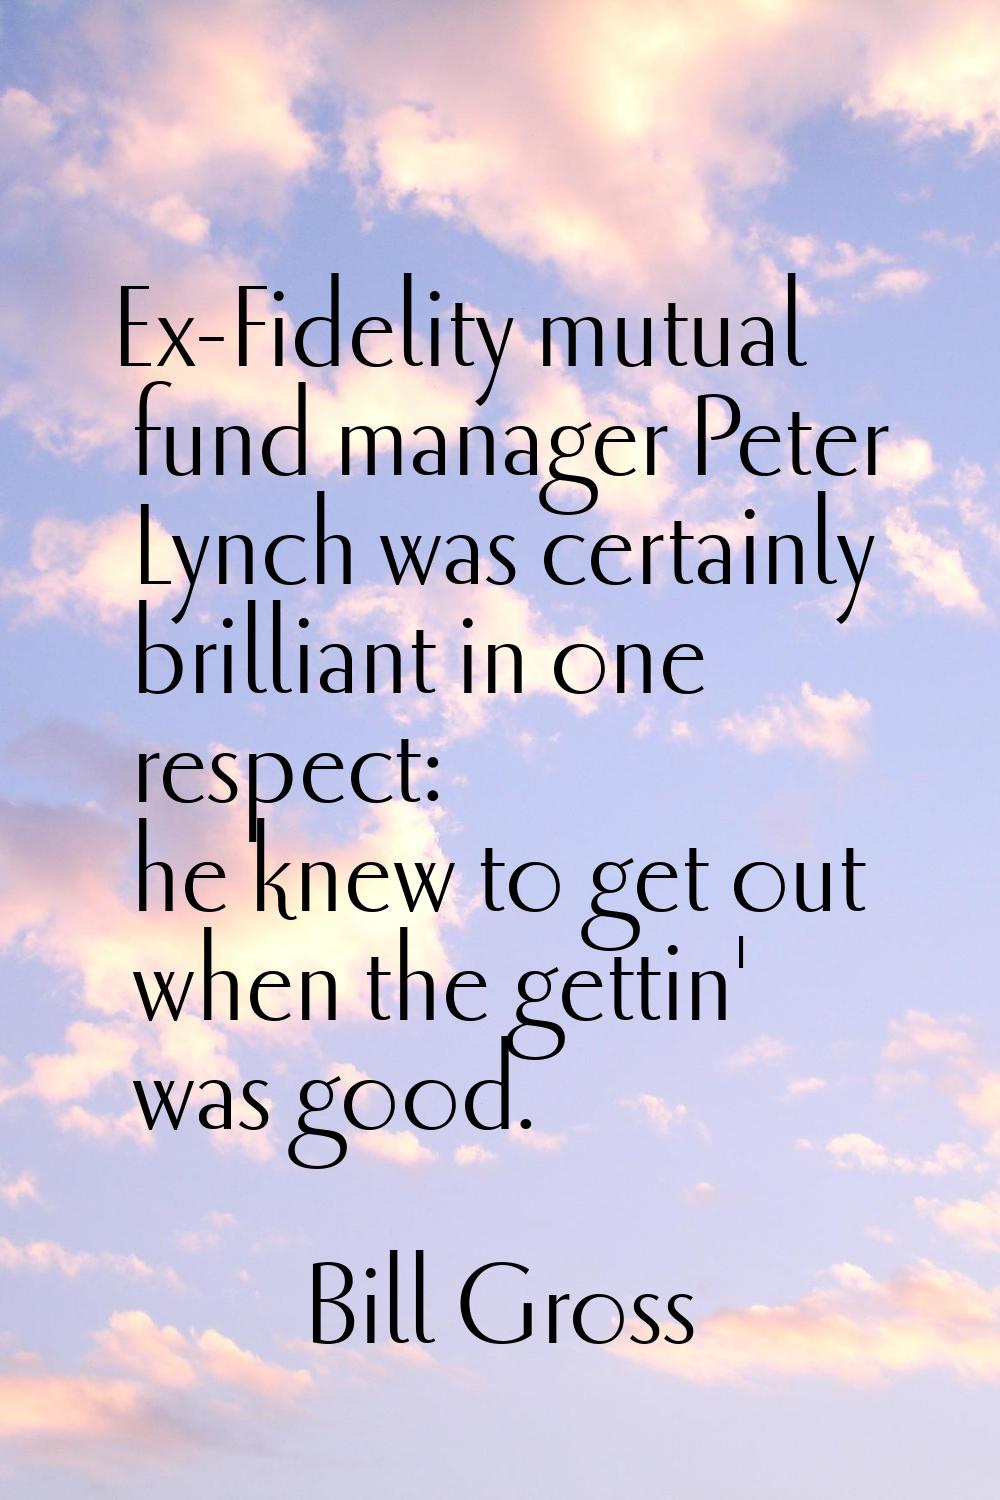 Ex-Fidelity mutual fund manager Peter Lynch was certainly brilliant in one respect: he knew to get 